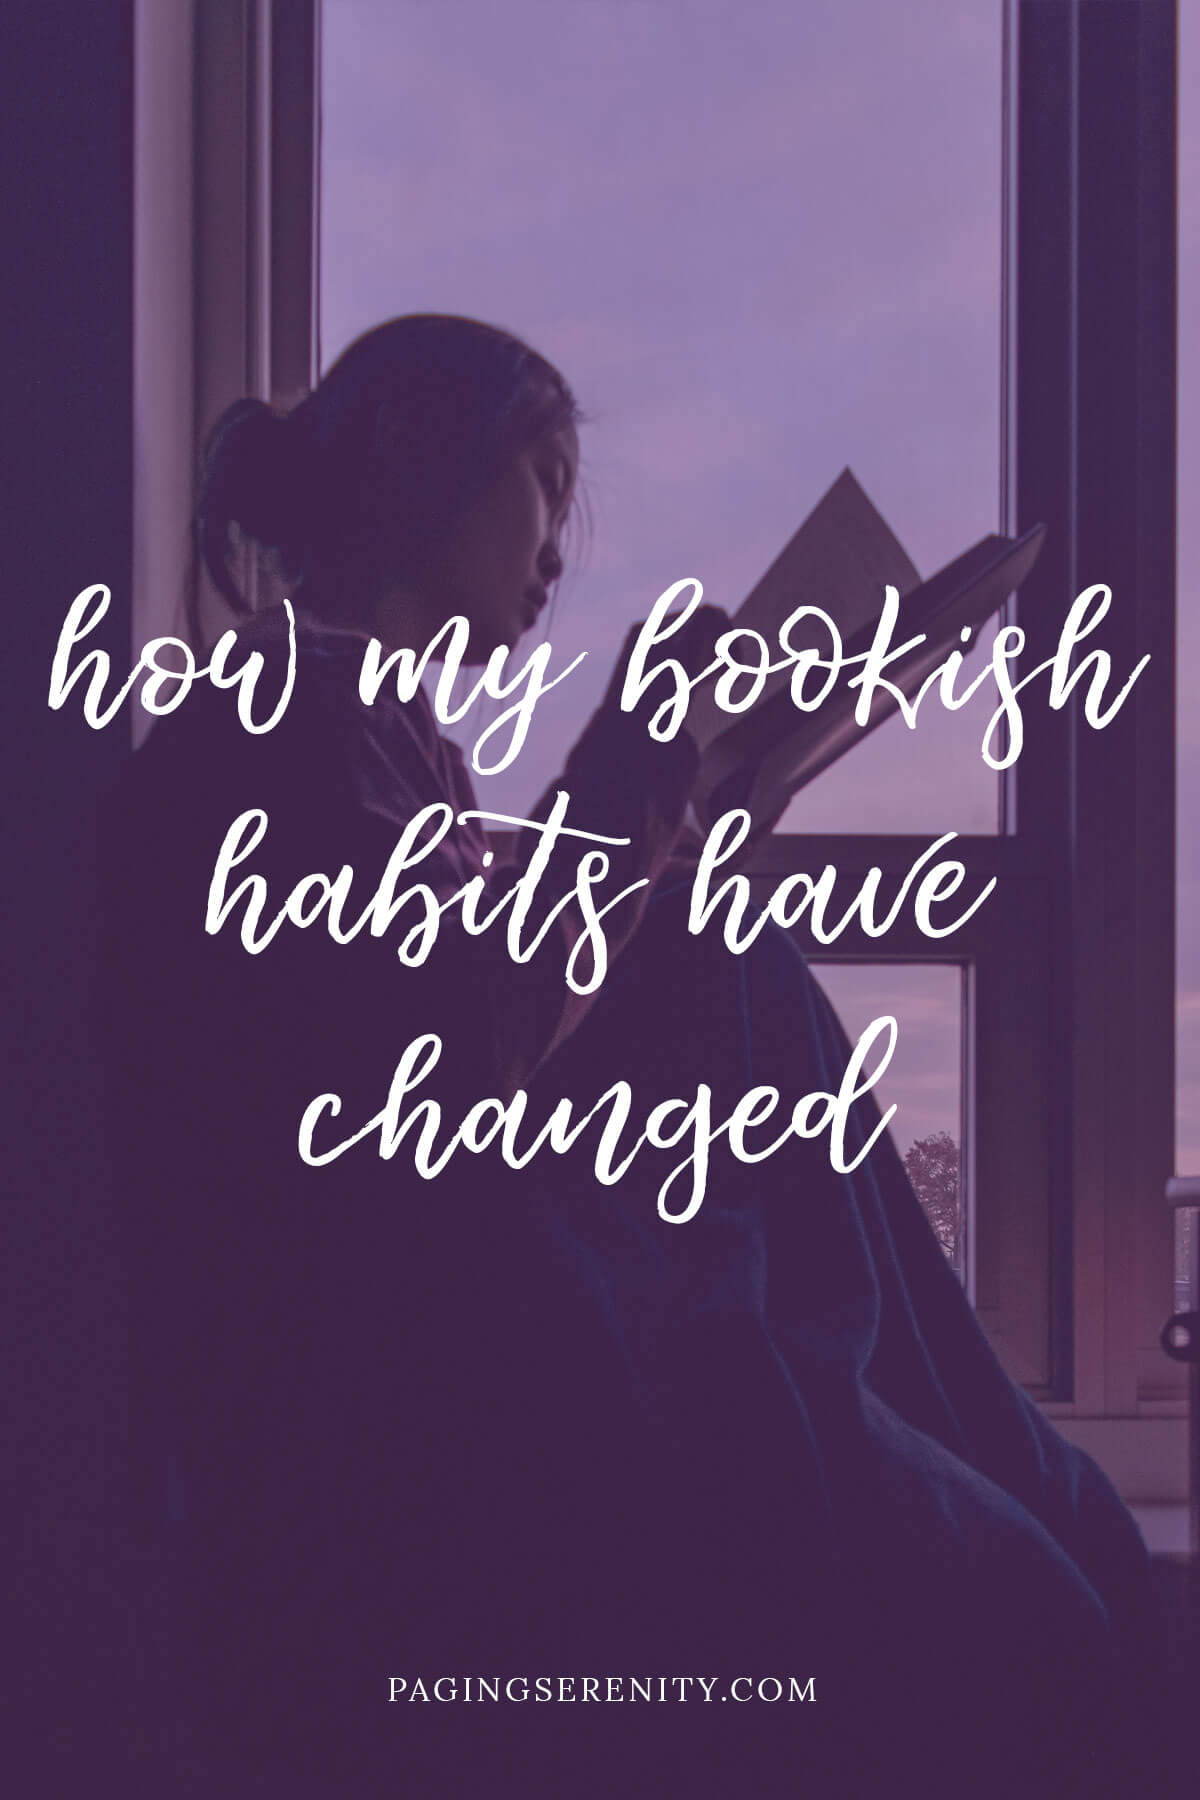 How my bookish habits have changed